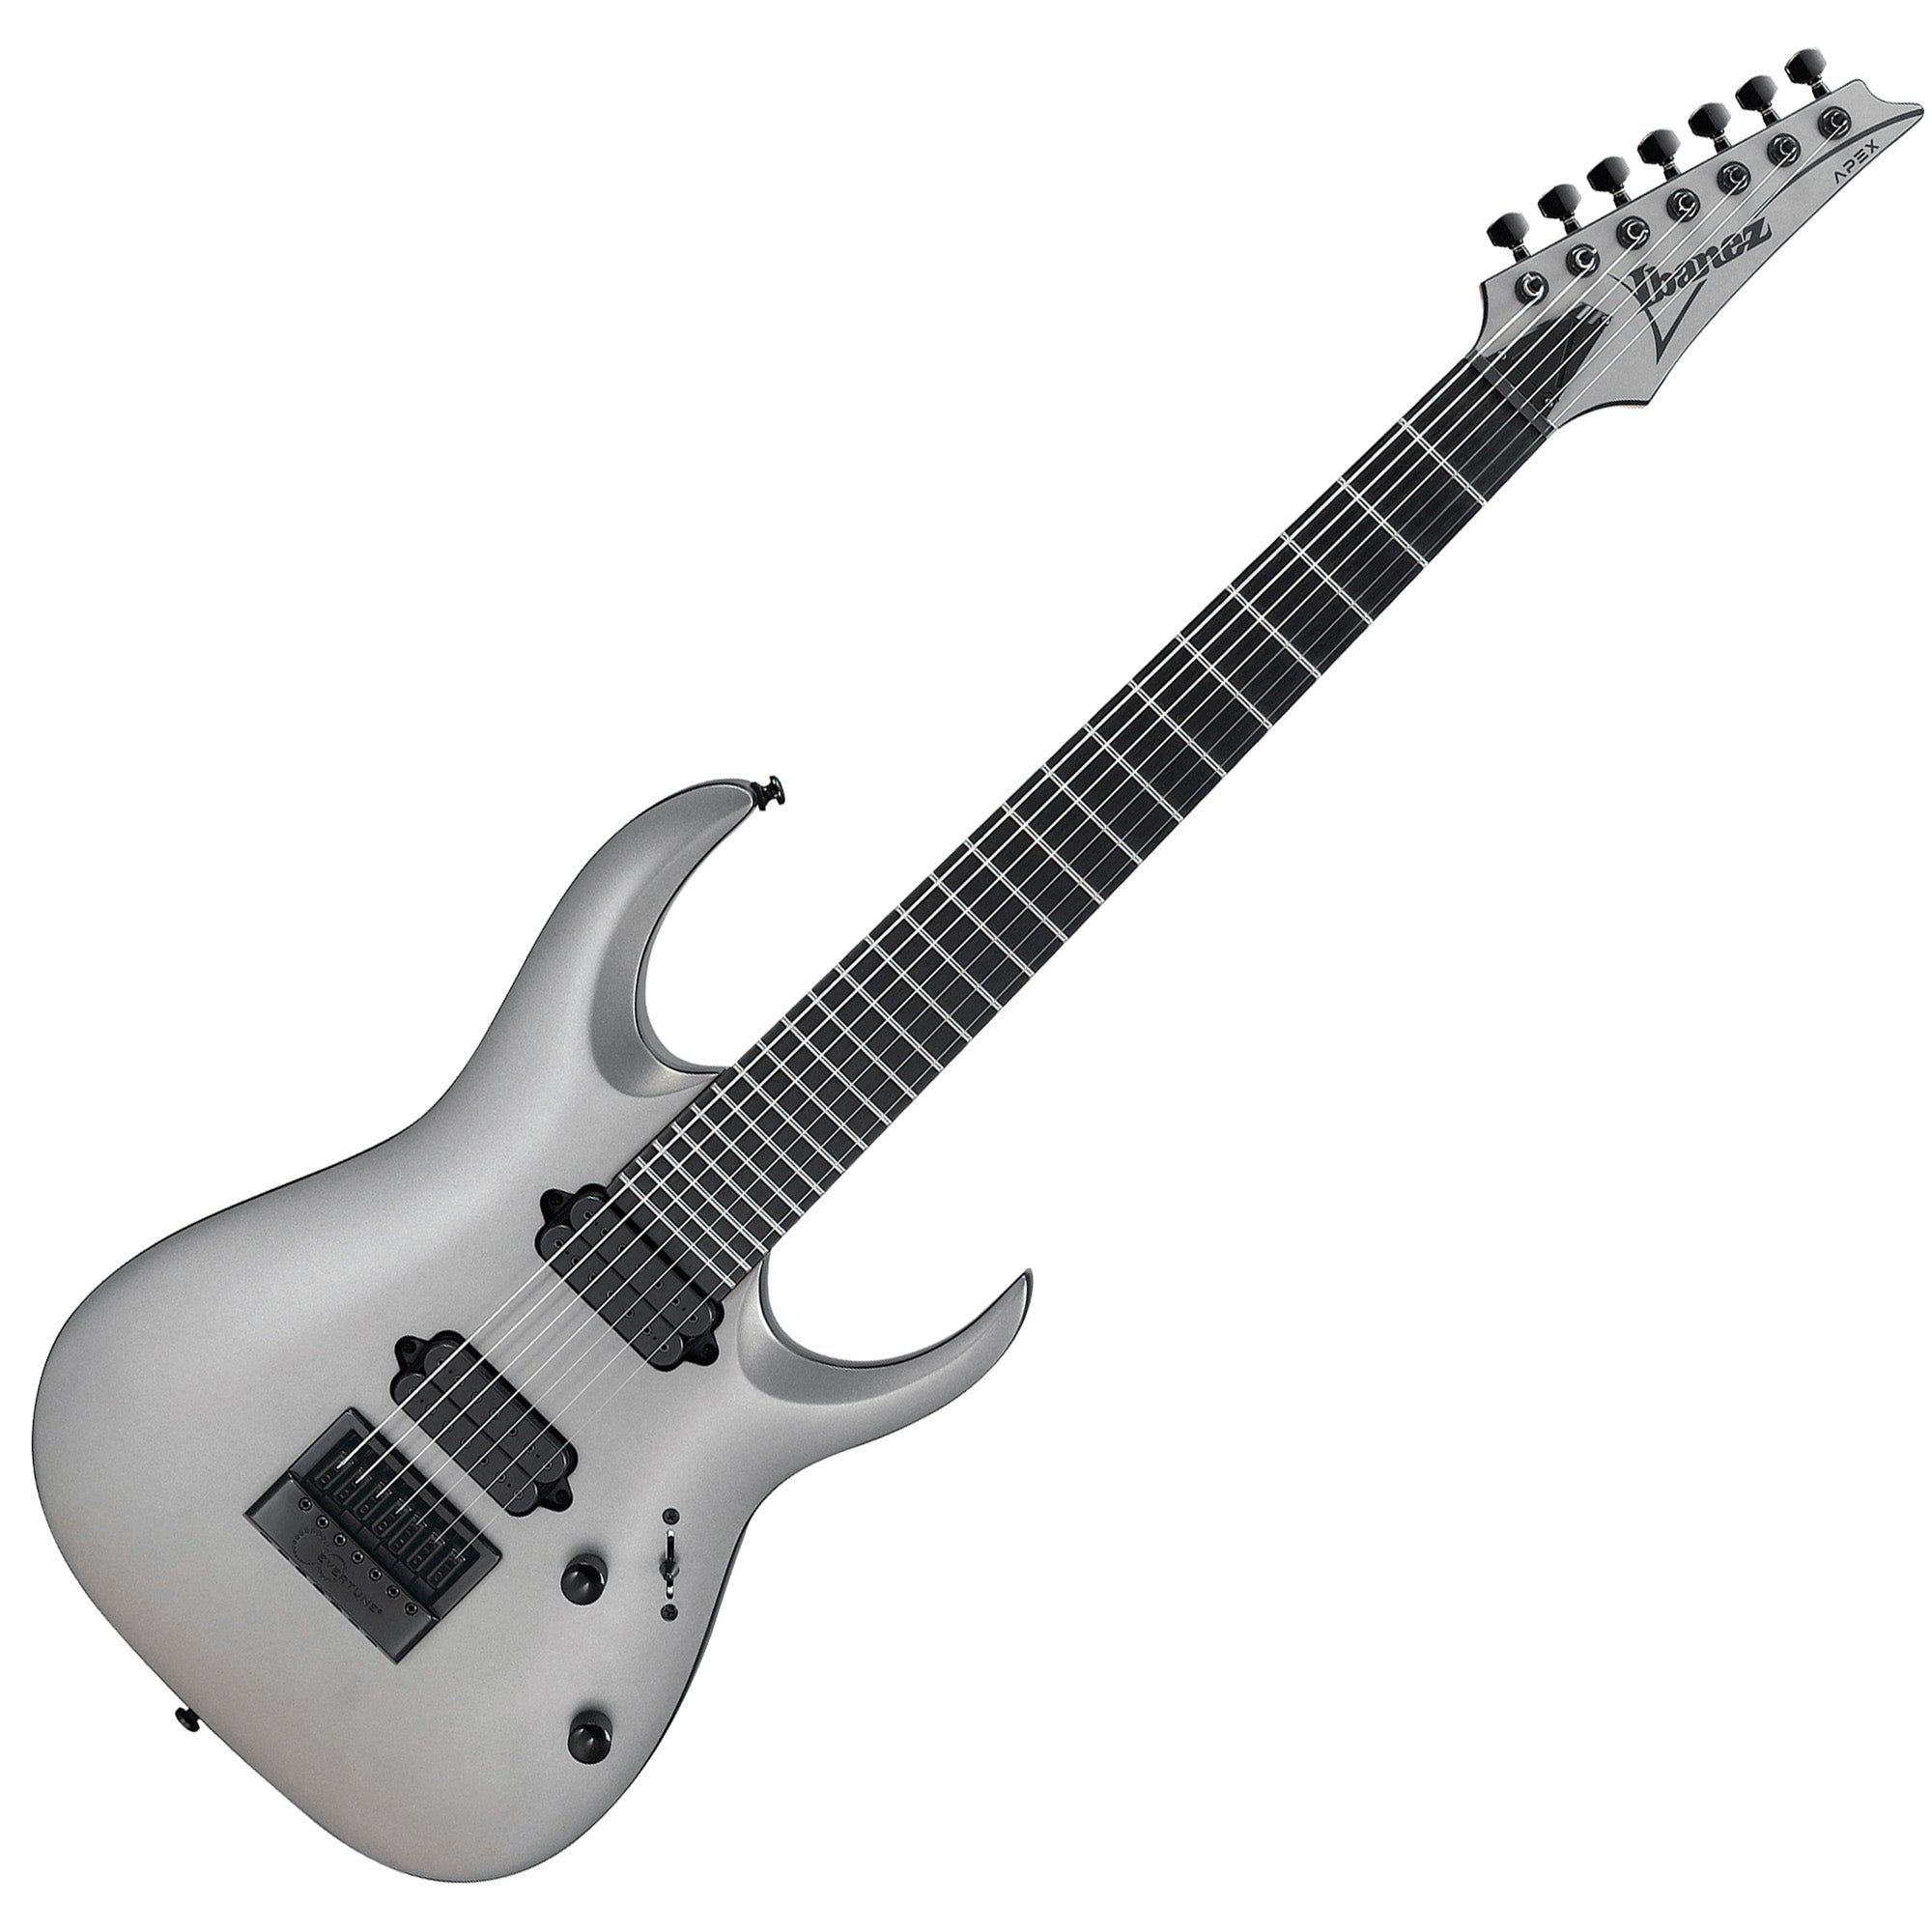 Ibanez Munky Signature Apex30 7-string Solidbody Electric Guitar 